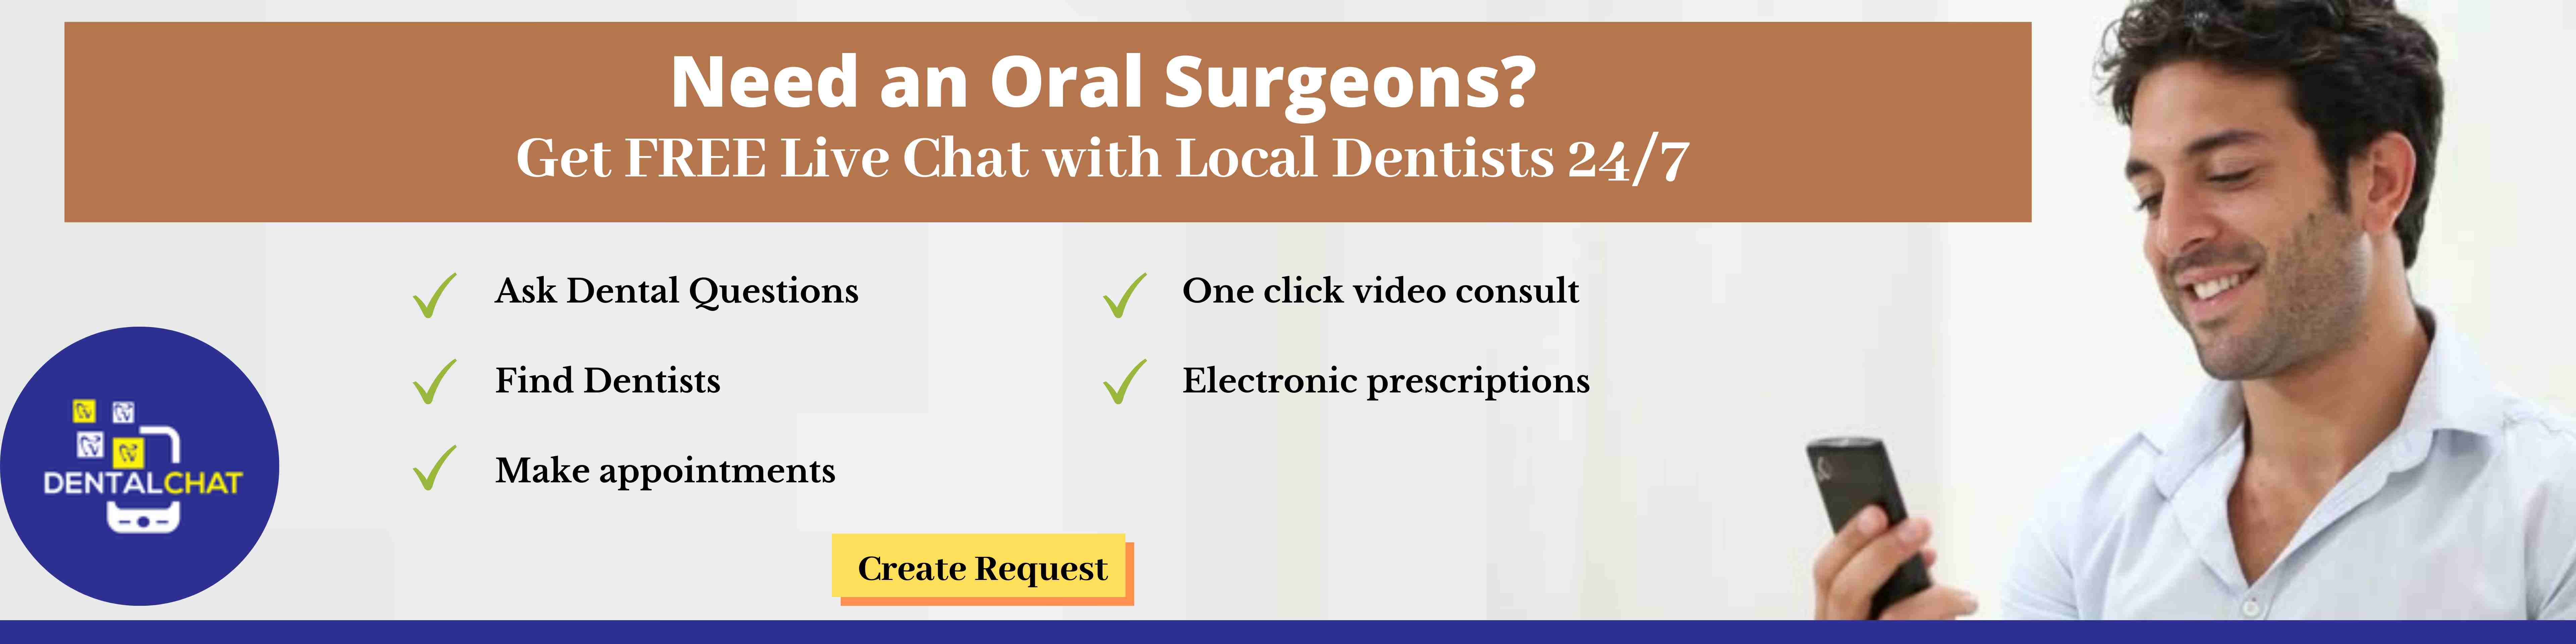 Oral surgery question ask local oral surgeons, best local oral pathology questions ask local emergency dentists